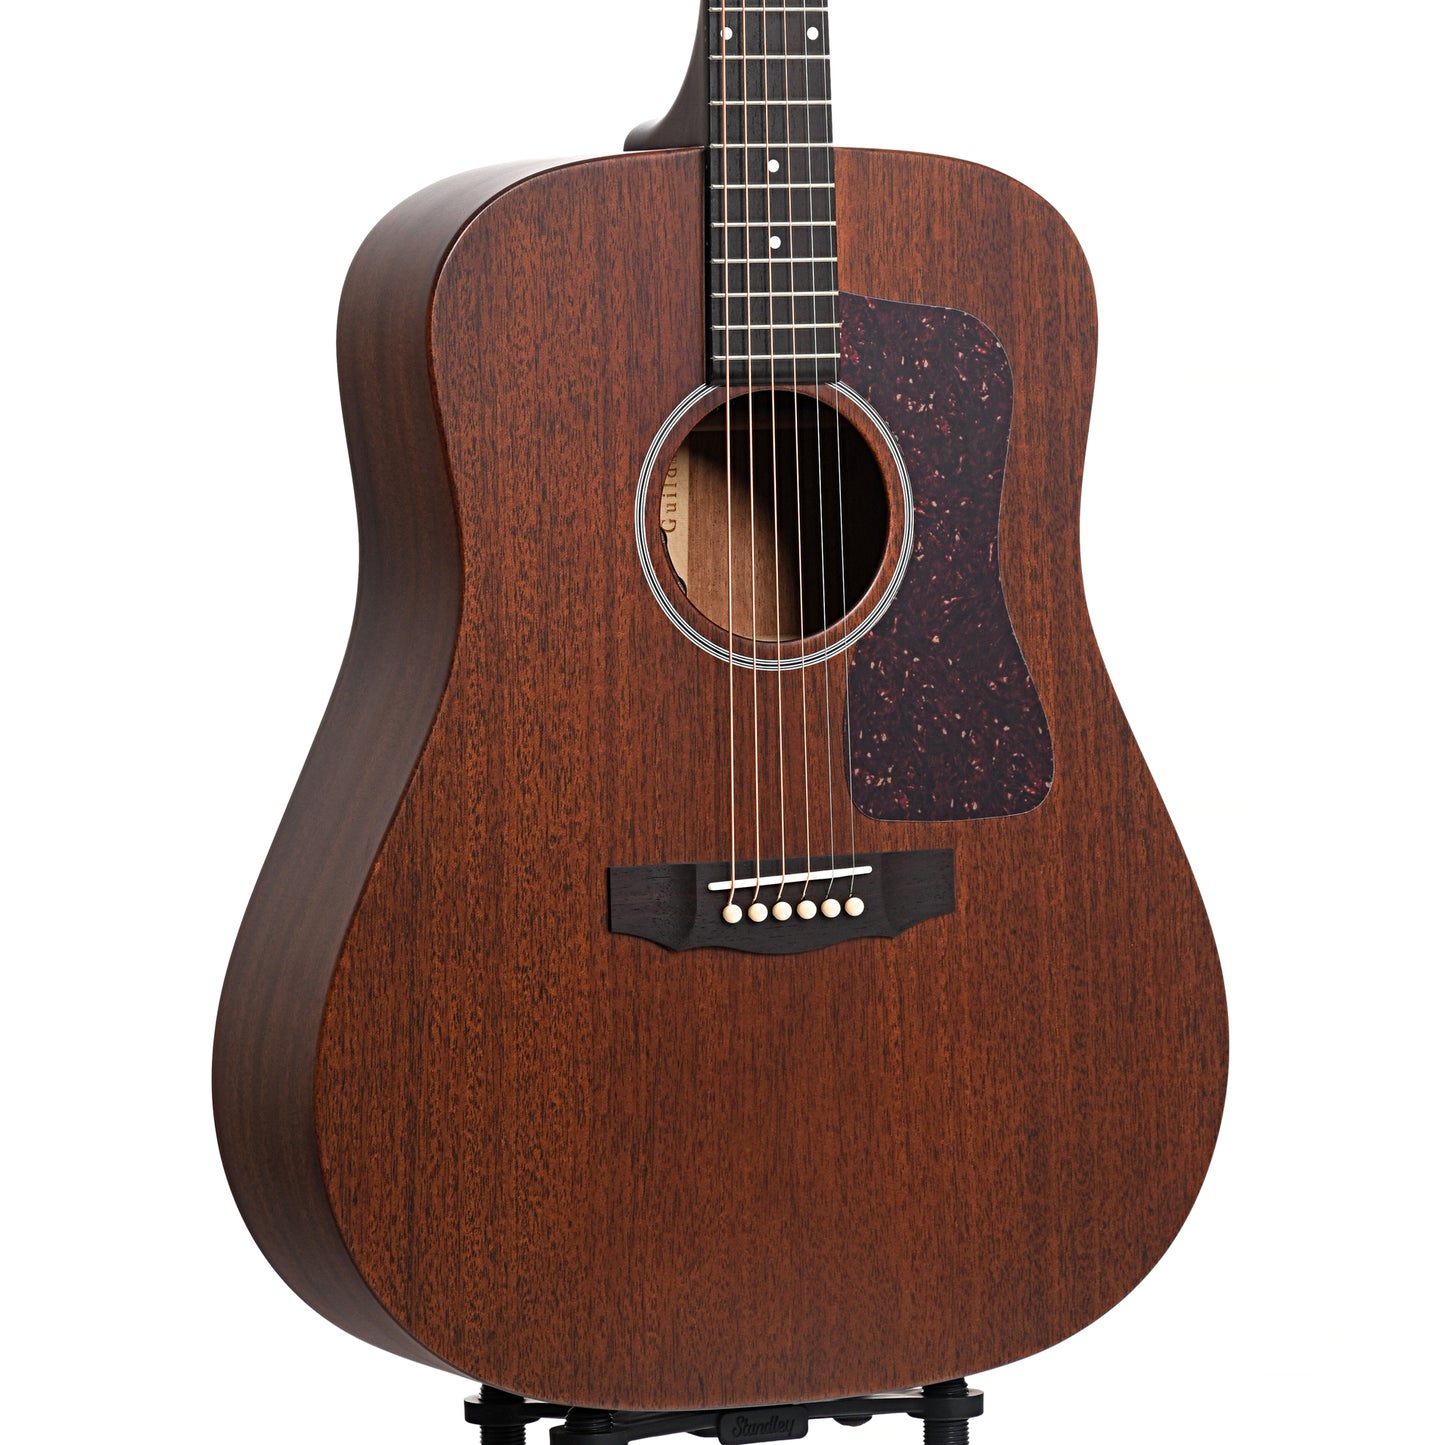 Image 5 of Guild USA D-20E Acoustic Guitar with Pickup & Case - SKU# GUID20E : Product Type Flat-top Guitars : Elderly Instruments